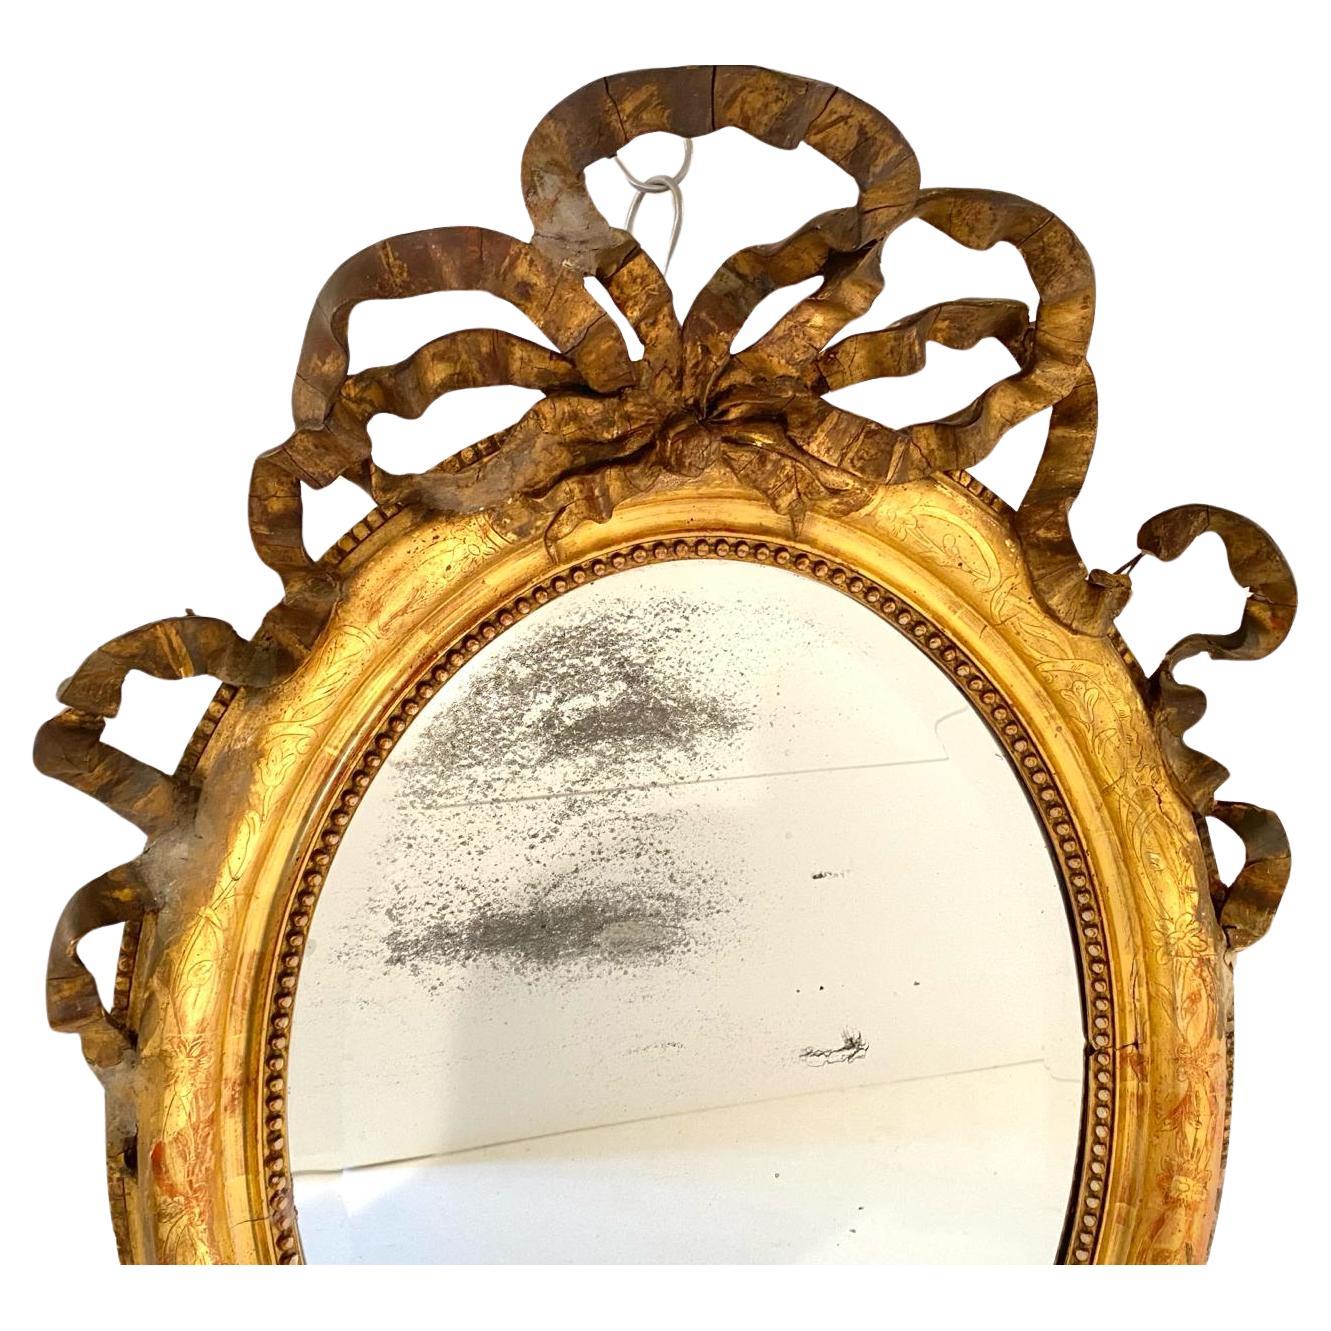 Antique gold Mirror, Italy 1850s.
A rare 19th century gold leaf oval mirror with classy refined frame. 
The mirror is made of a solid wood frame with gold leaf finishing and finely refined with elegant details. Both on the top and the bottom of the